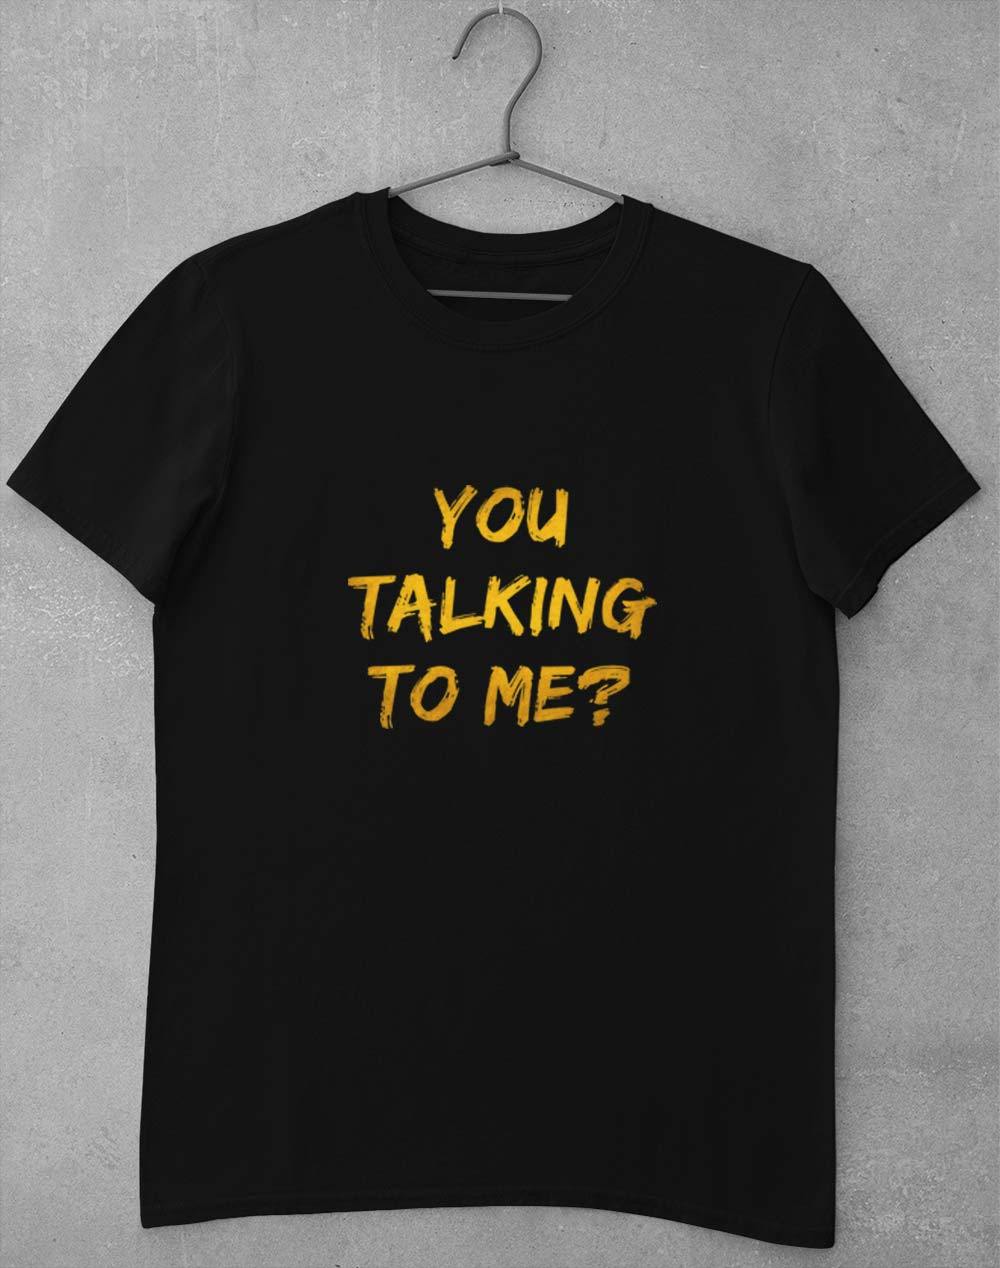 You Talking To Me? T-Shirt S / Black  - Off World Tees